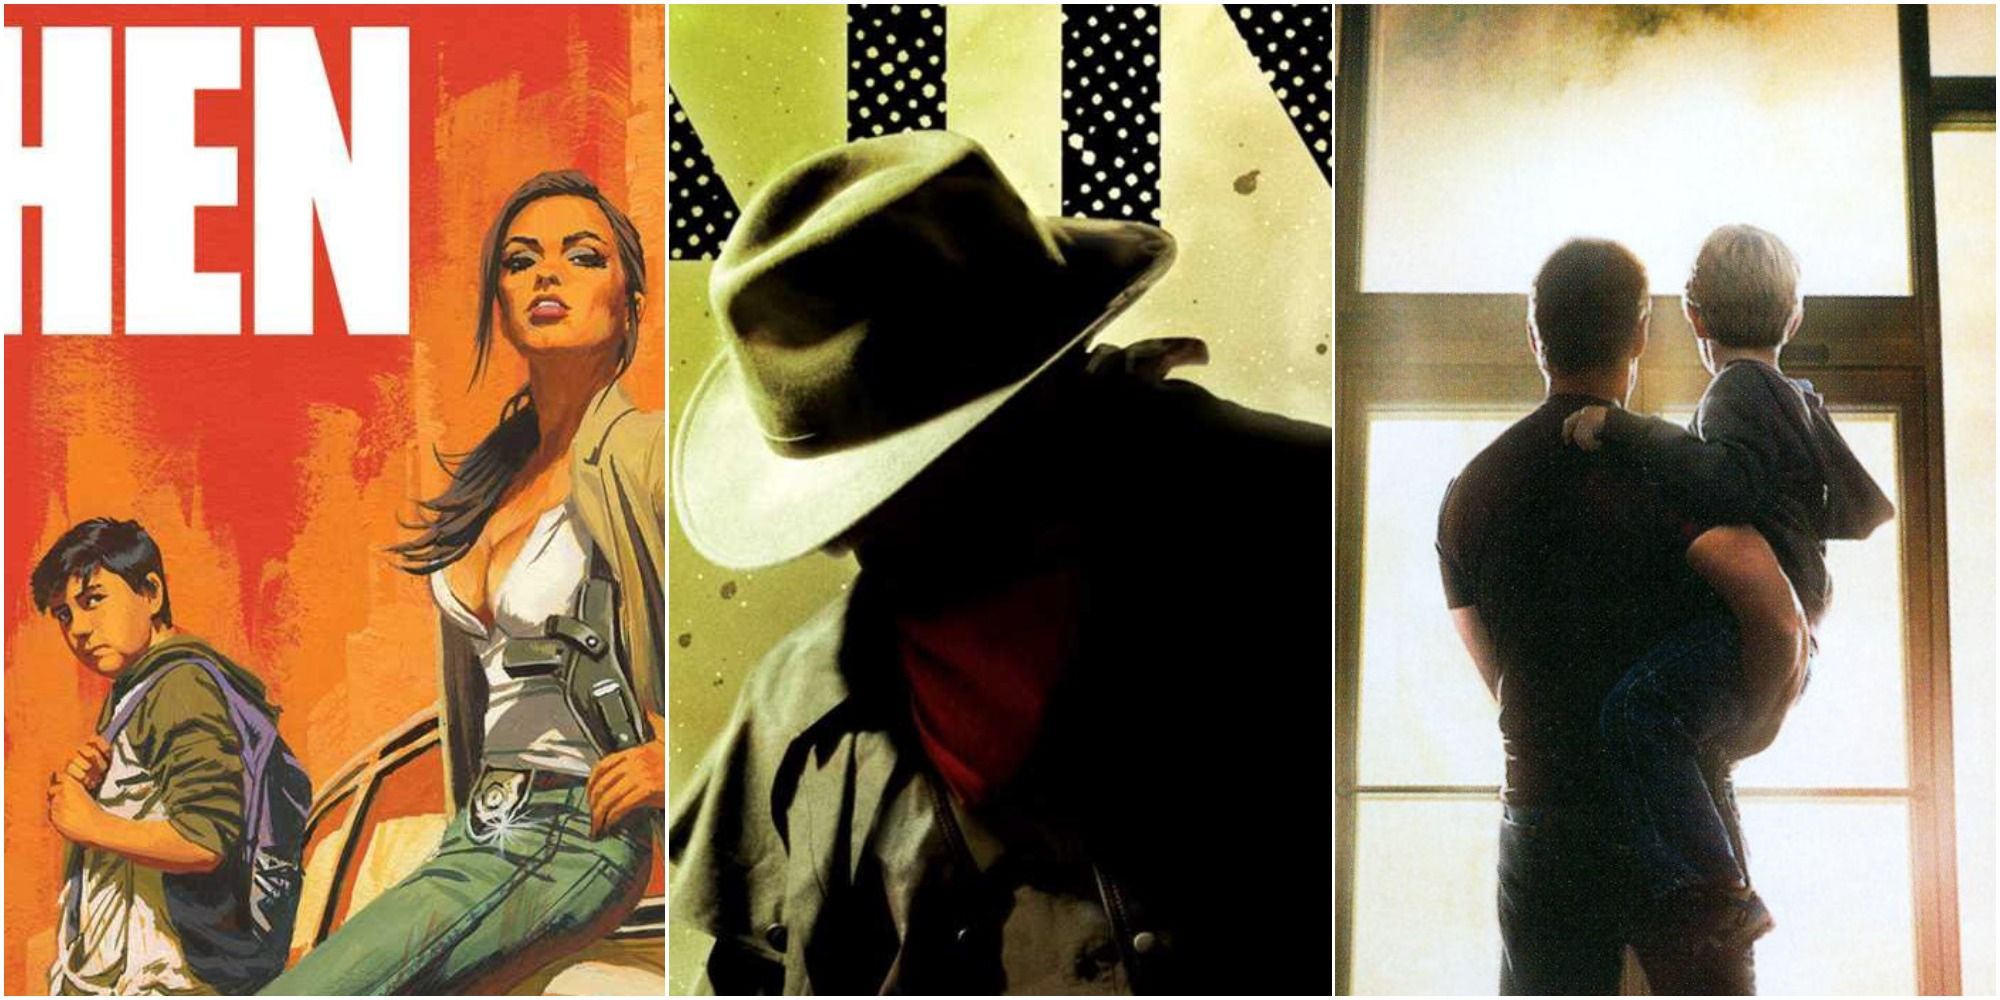 Stephen King Video Game feature with covers from Later, The Gunslinger, and The Mist